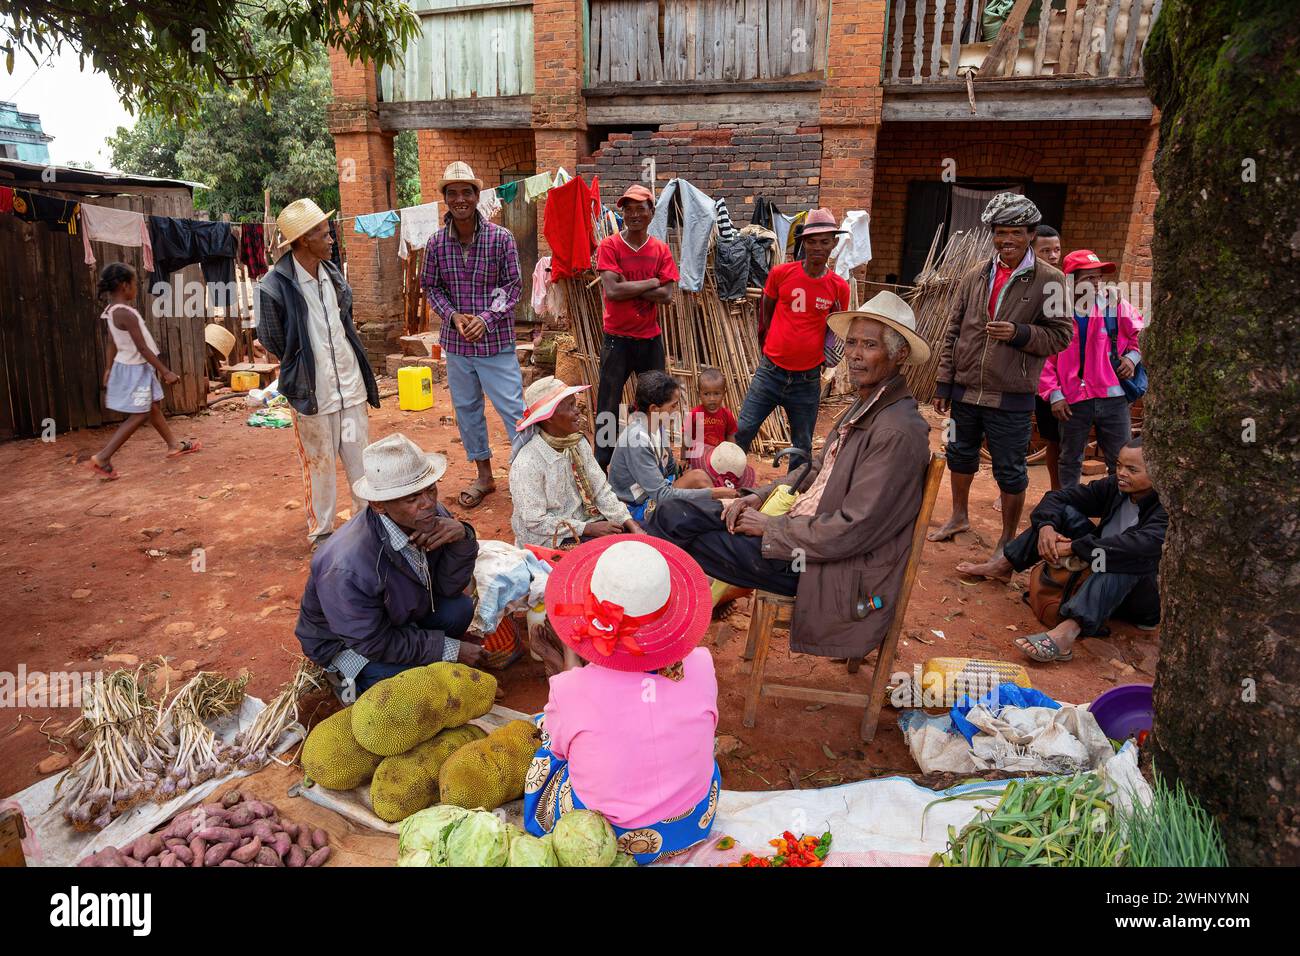 Street market in Mandoto city, with vendors and ordinary people shopping and socializing. This image portrays the local lifestyl Stock Photo